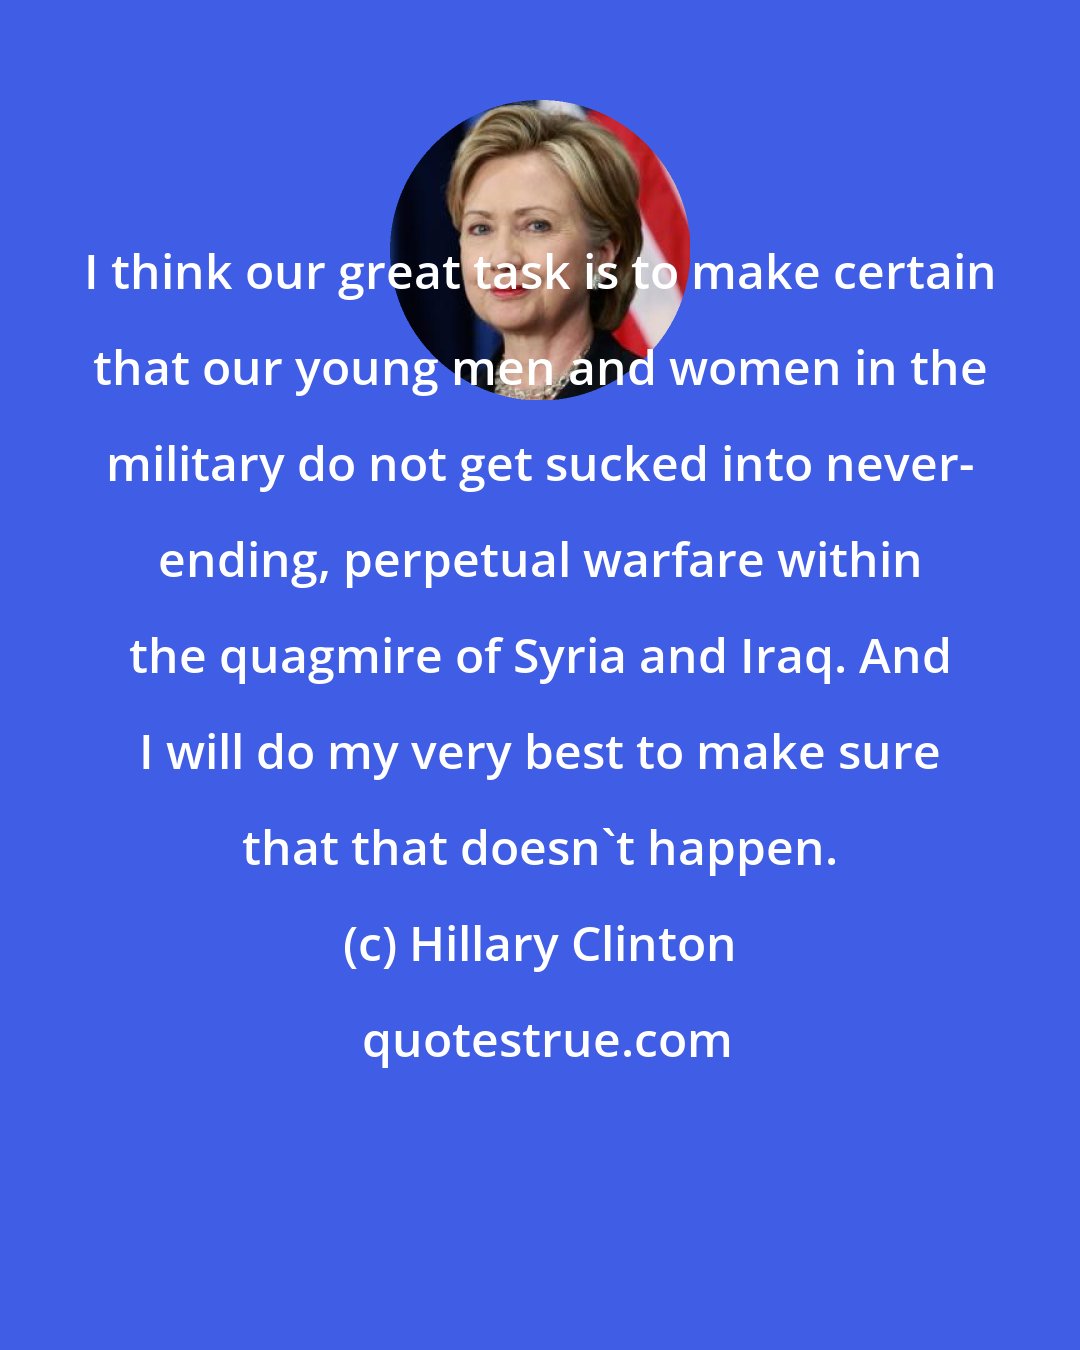 Hillary Clinton: I think our great task is to make certain that our young men and women in the military do not get sucked into never- ending, perpetual warfare within the quagmire of Syria and Iraq. And I will do my very best to make sure that that doesn't happen.